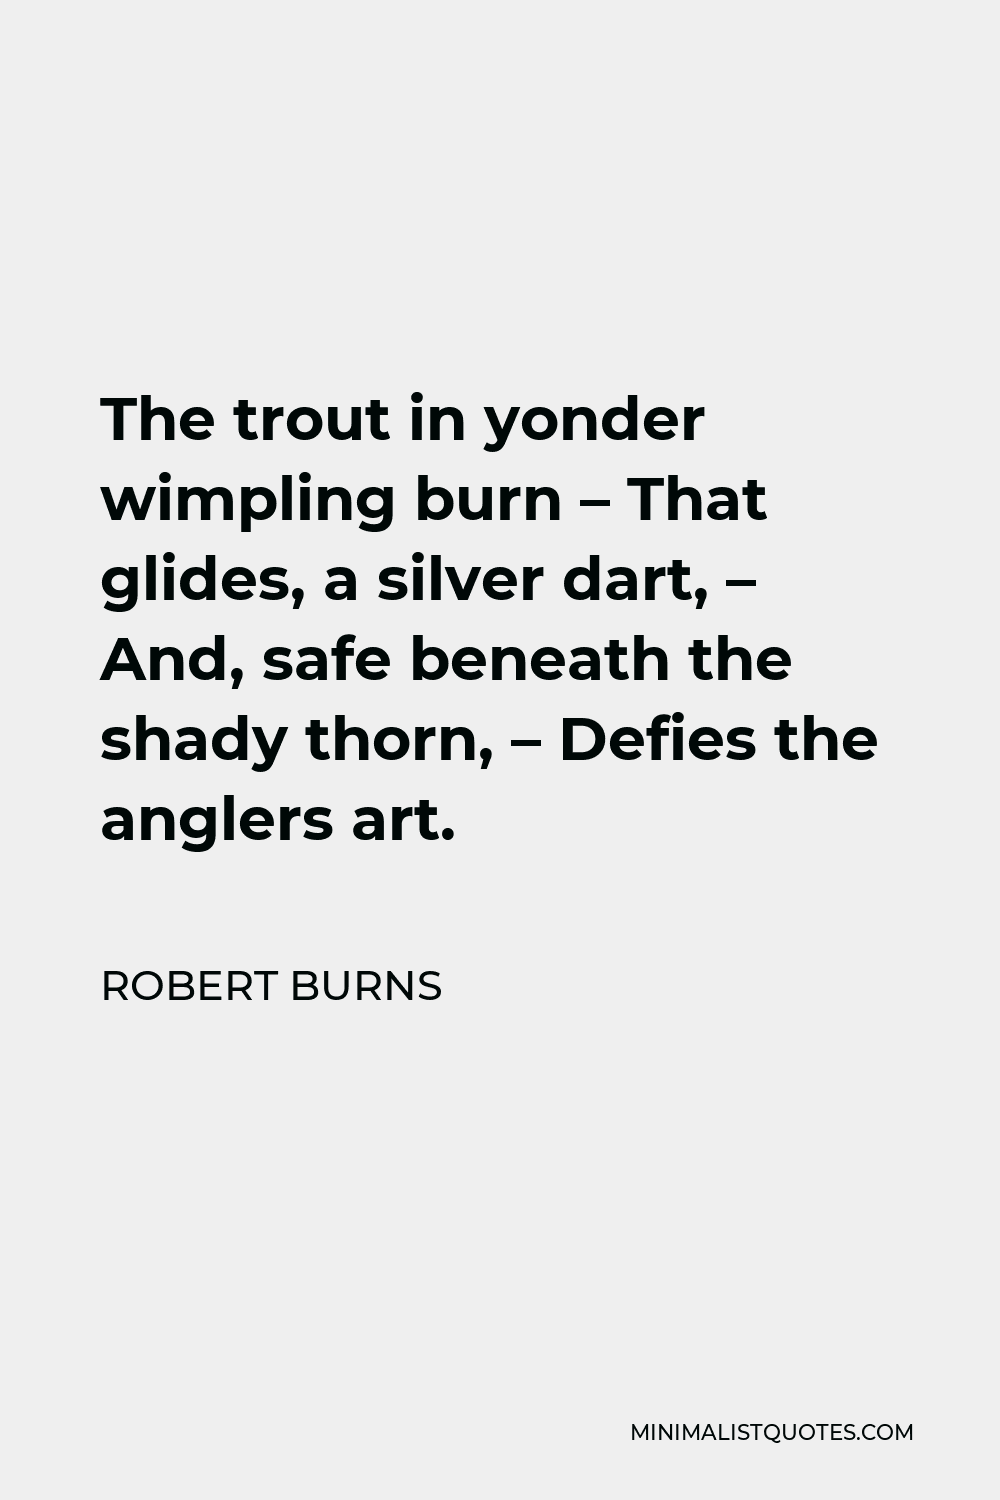 Robert Burns Quote - The trout in yonder wimpling burn – That glides, a silver dart, – And, safe beneath the shady thorn, – Defies the anglers art.